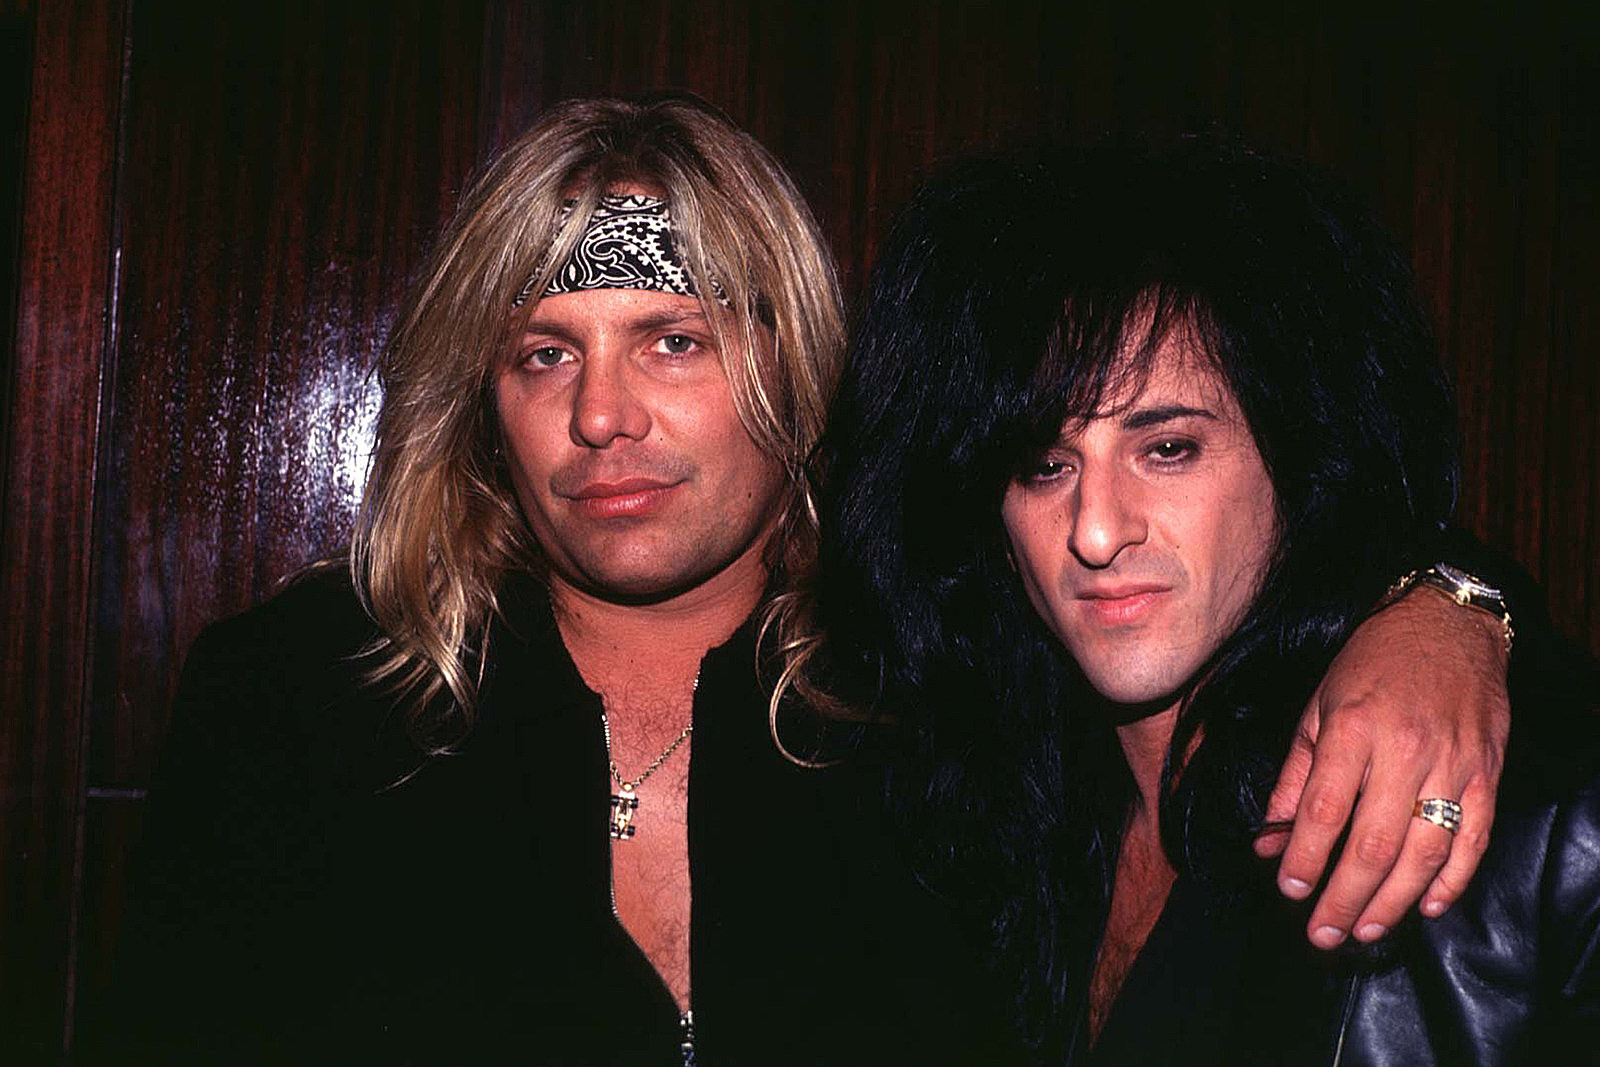 How Vince Neil Beat Motley Crue To The Punch With 'Exposed'